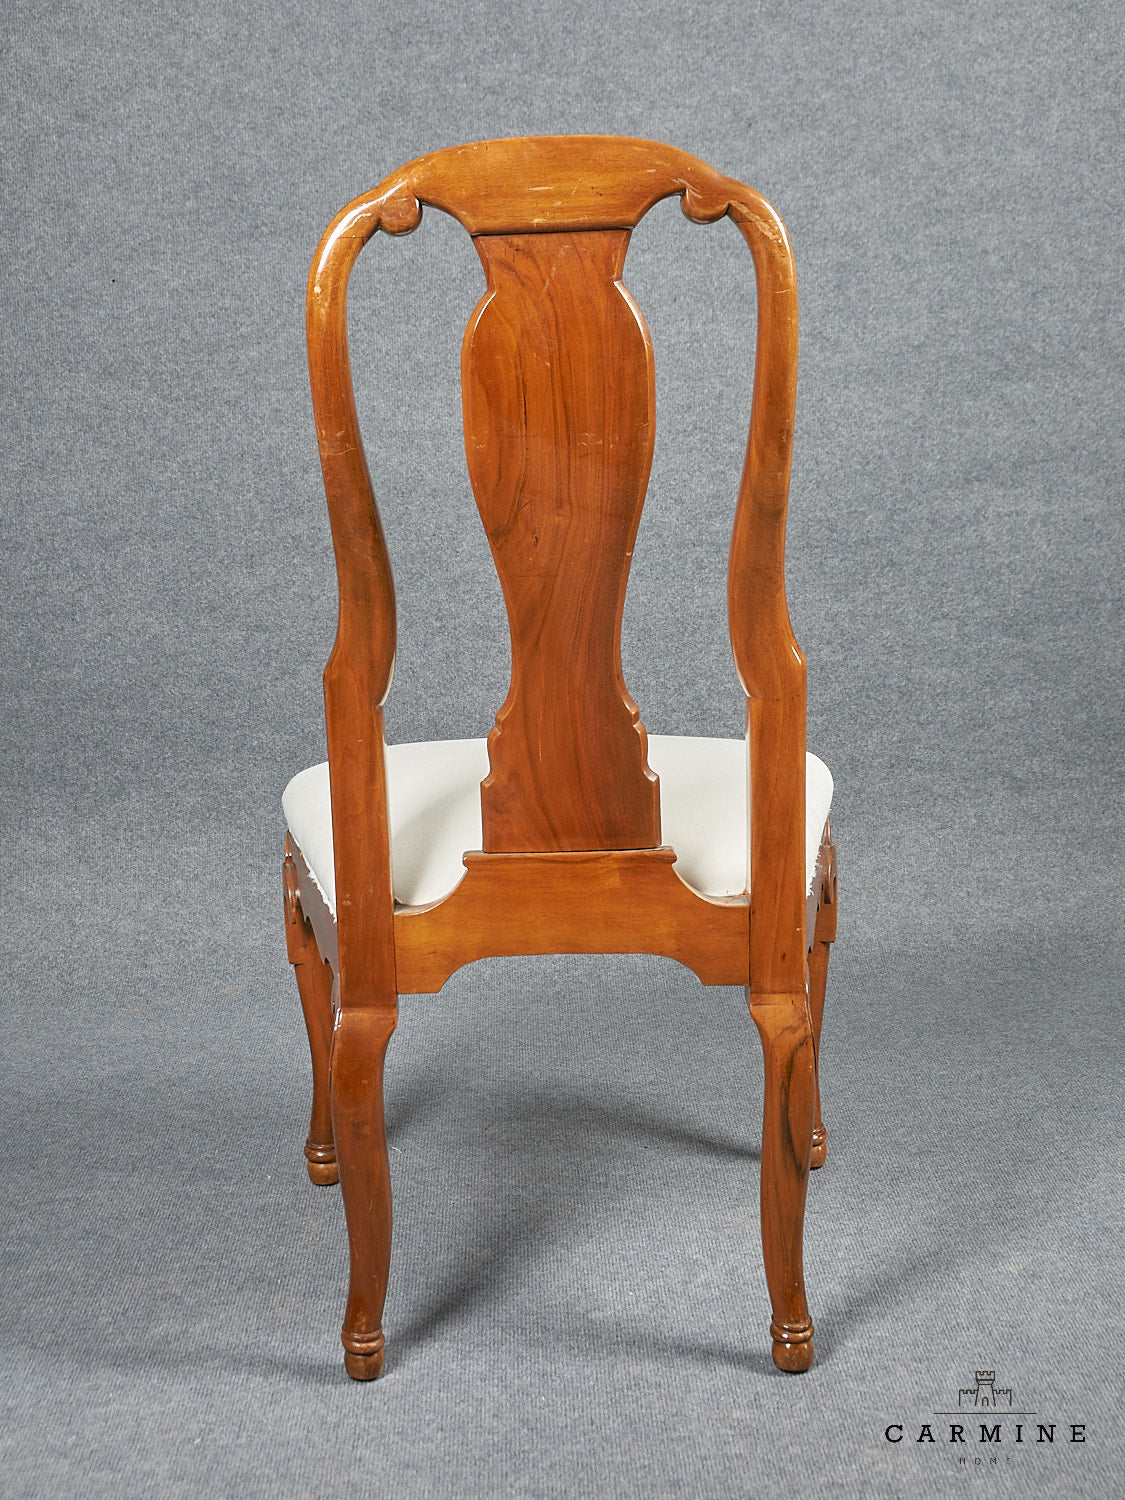 1 pair of Bernese tongue chairs, 18th century